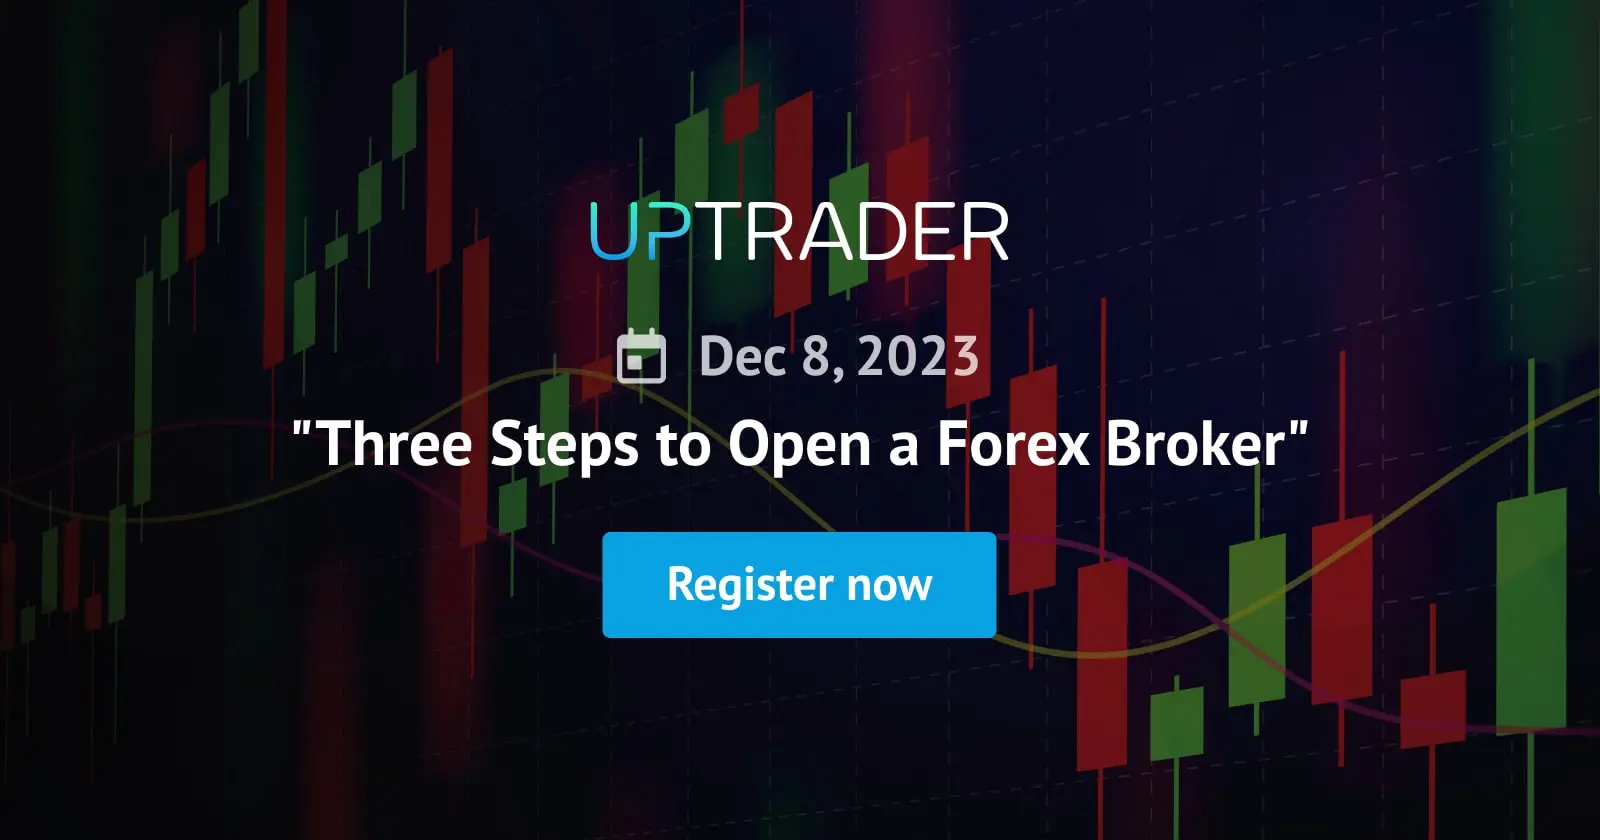 UpTrader Invites Aspiring Forex Brokers to Exclusive Webinar "Three Steps to Open a Forex Broker"